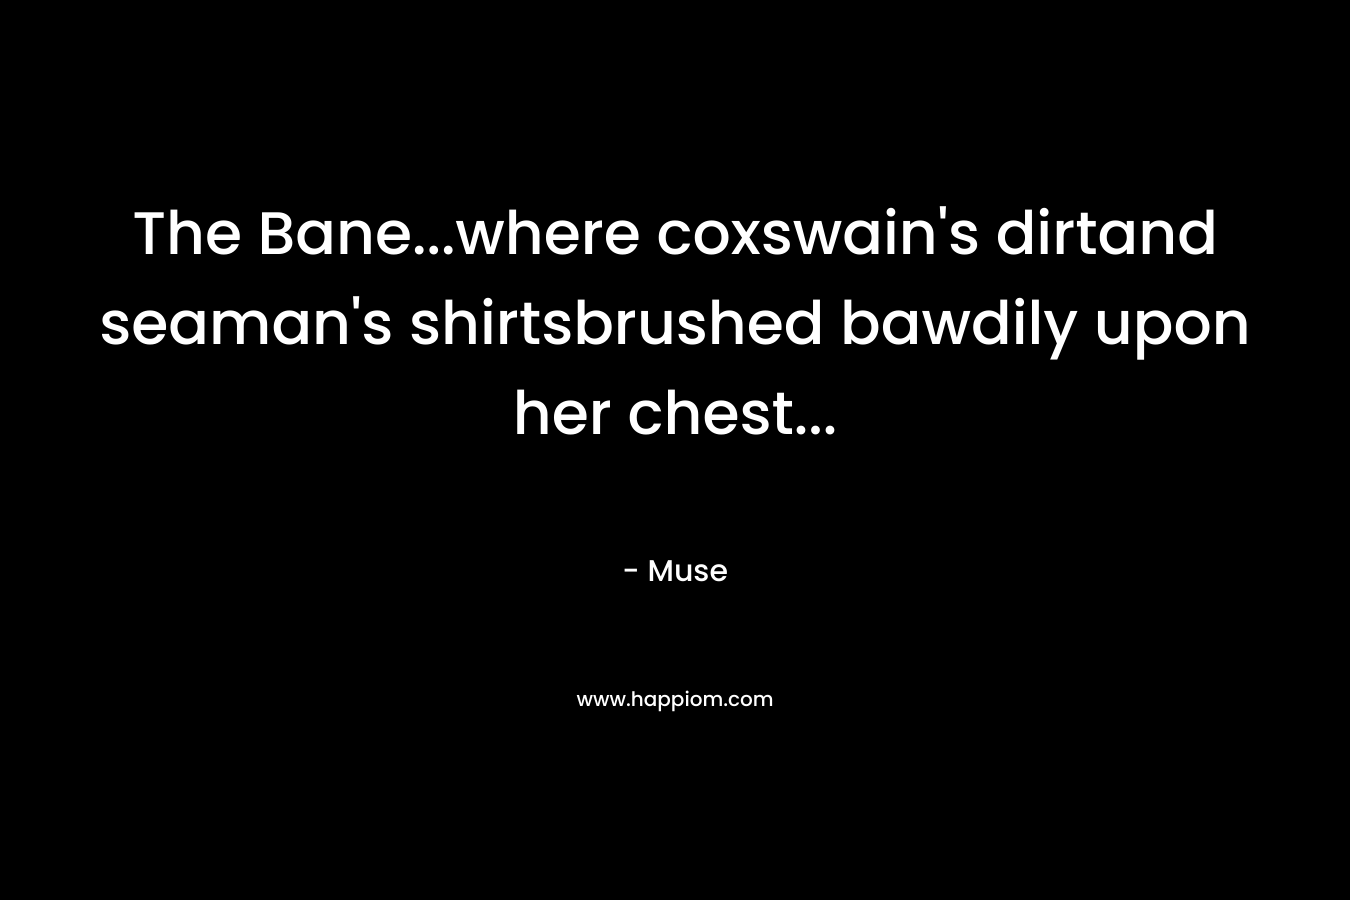 The Bane…where coxswain’s dirtand seaman’s shirtsbrushed bawdily upon her chest… – Muse